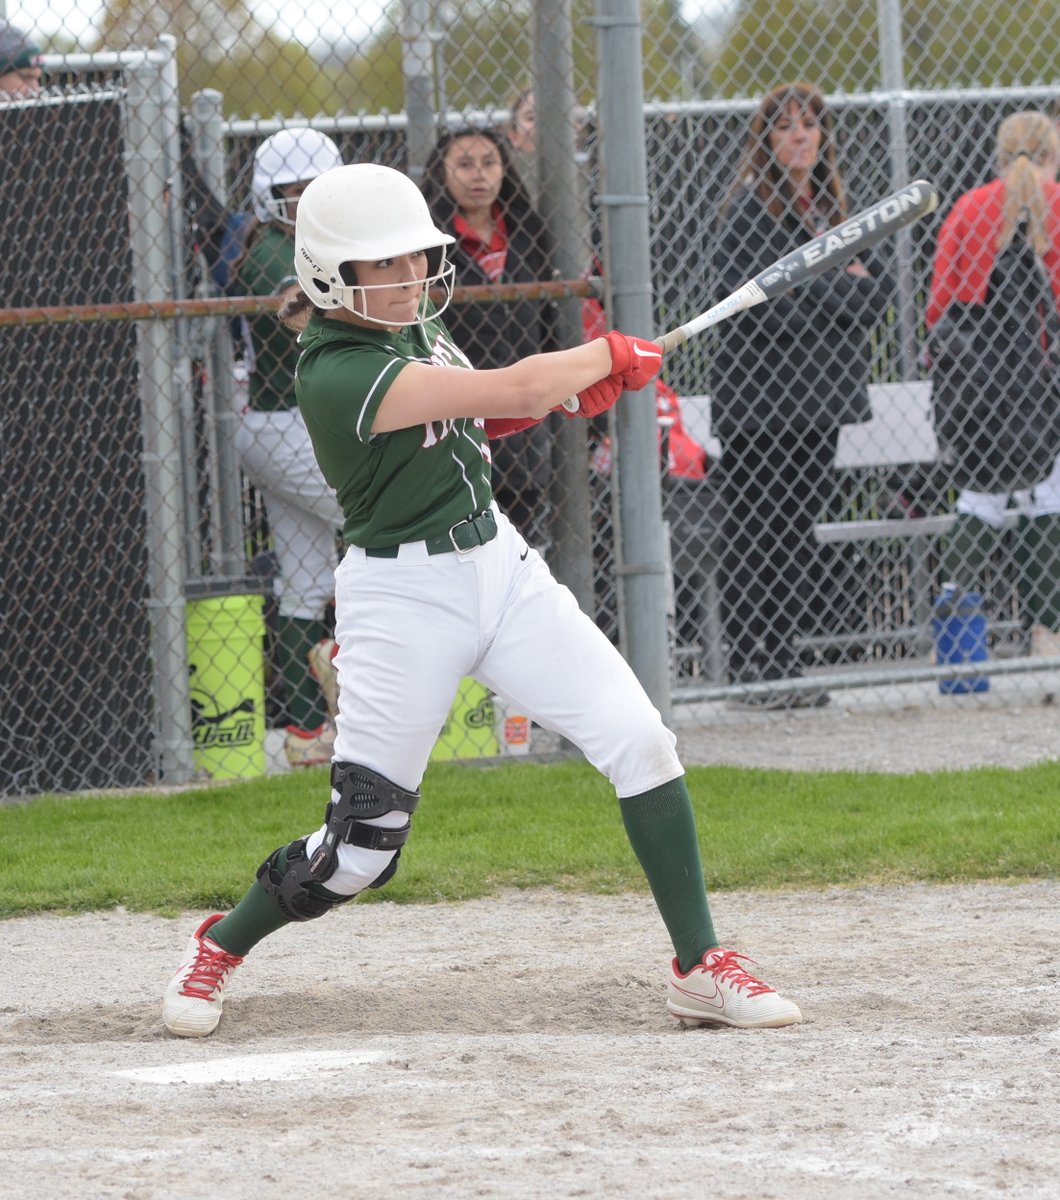 ☘️ CONGRATS Angelina Martinez on being named to @CHSL1926 All-League Team!!! Member of Cardinal Division Champion @IrishSoftball_, Angelina batted .286 (18-for-63) with 12 RS, 5 doubles, & 20 RBI ... GO IRISH!!! #CentralToLife ☘️ Click HERE for Release ⬇️ bit.ly/3QOzWs0